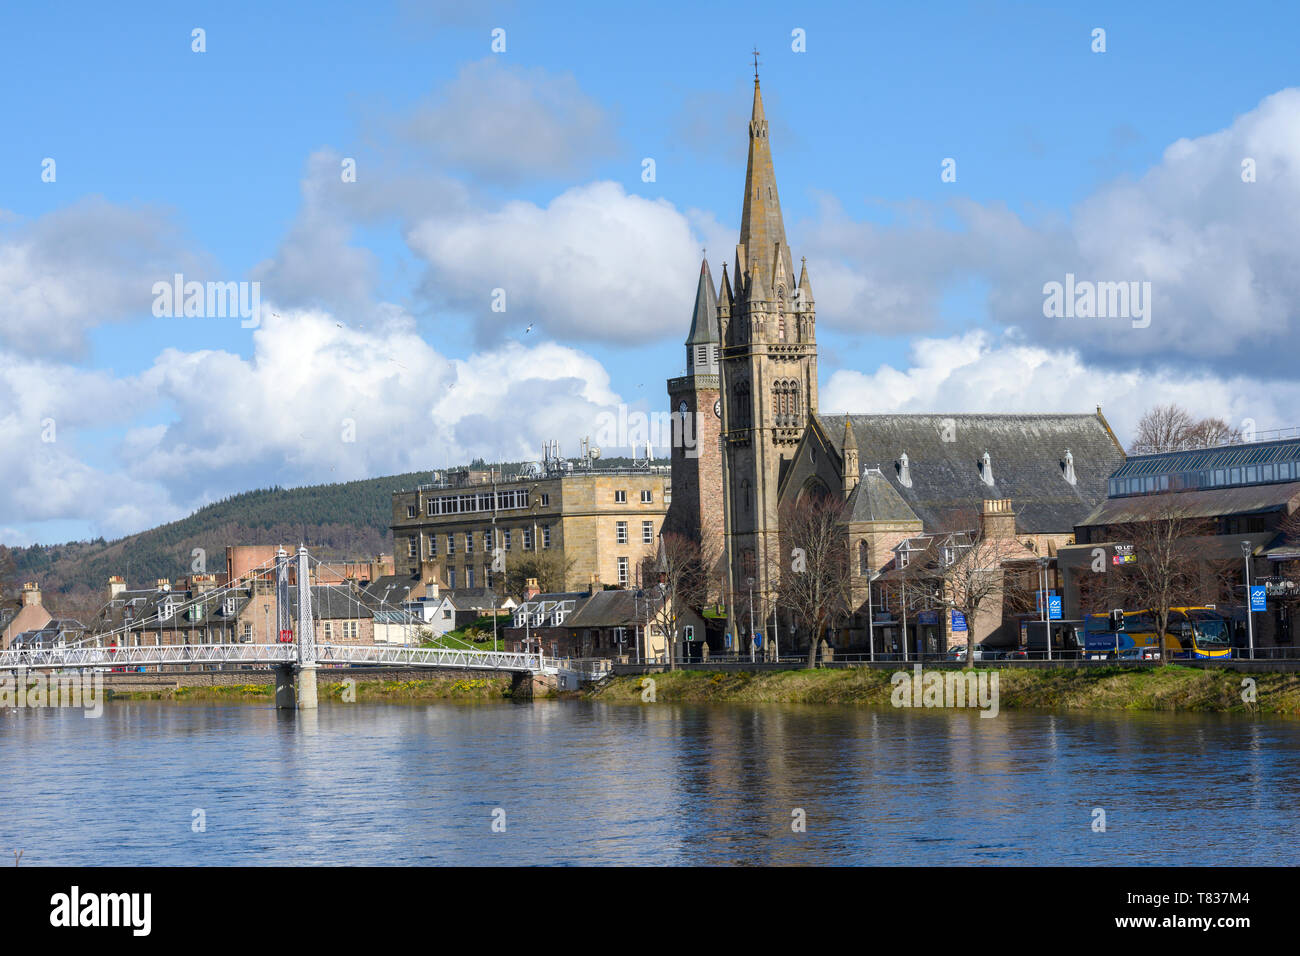 Landscape view of River Ness as it flows through Inverness, Highland, Scotland, UK Stock Photo